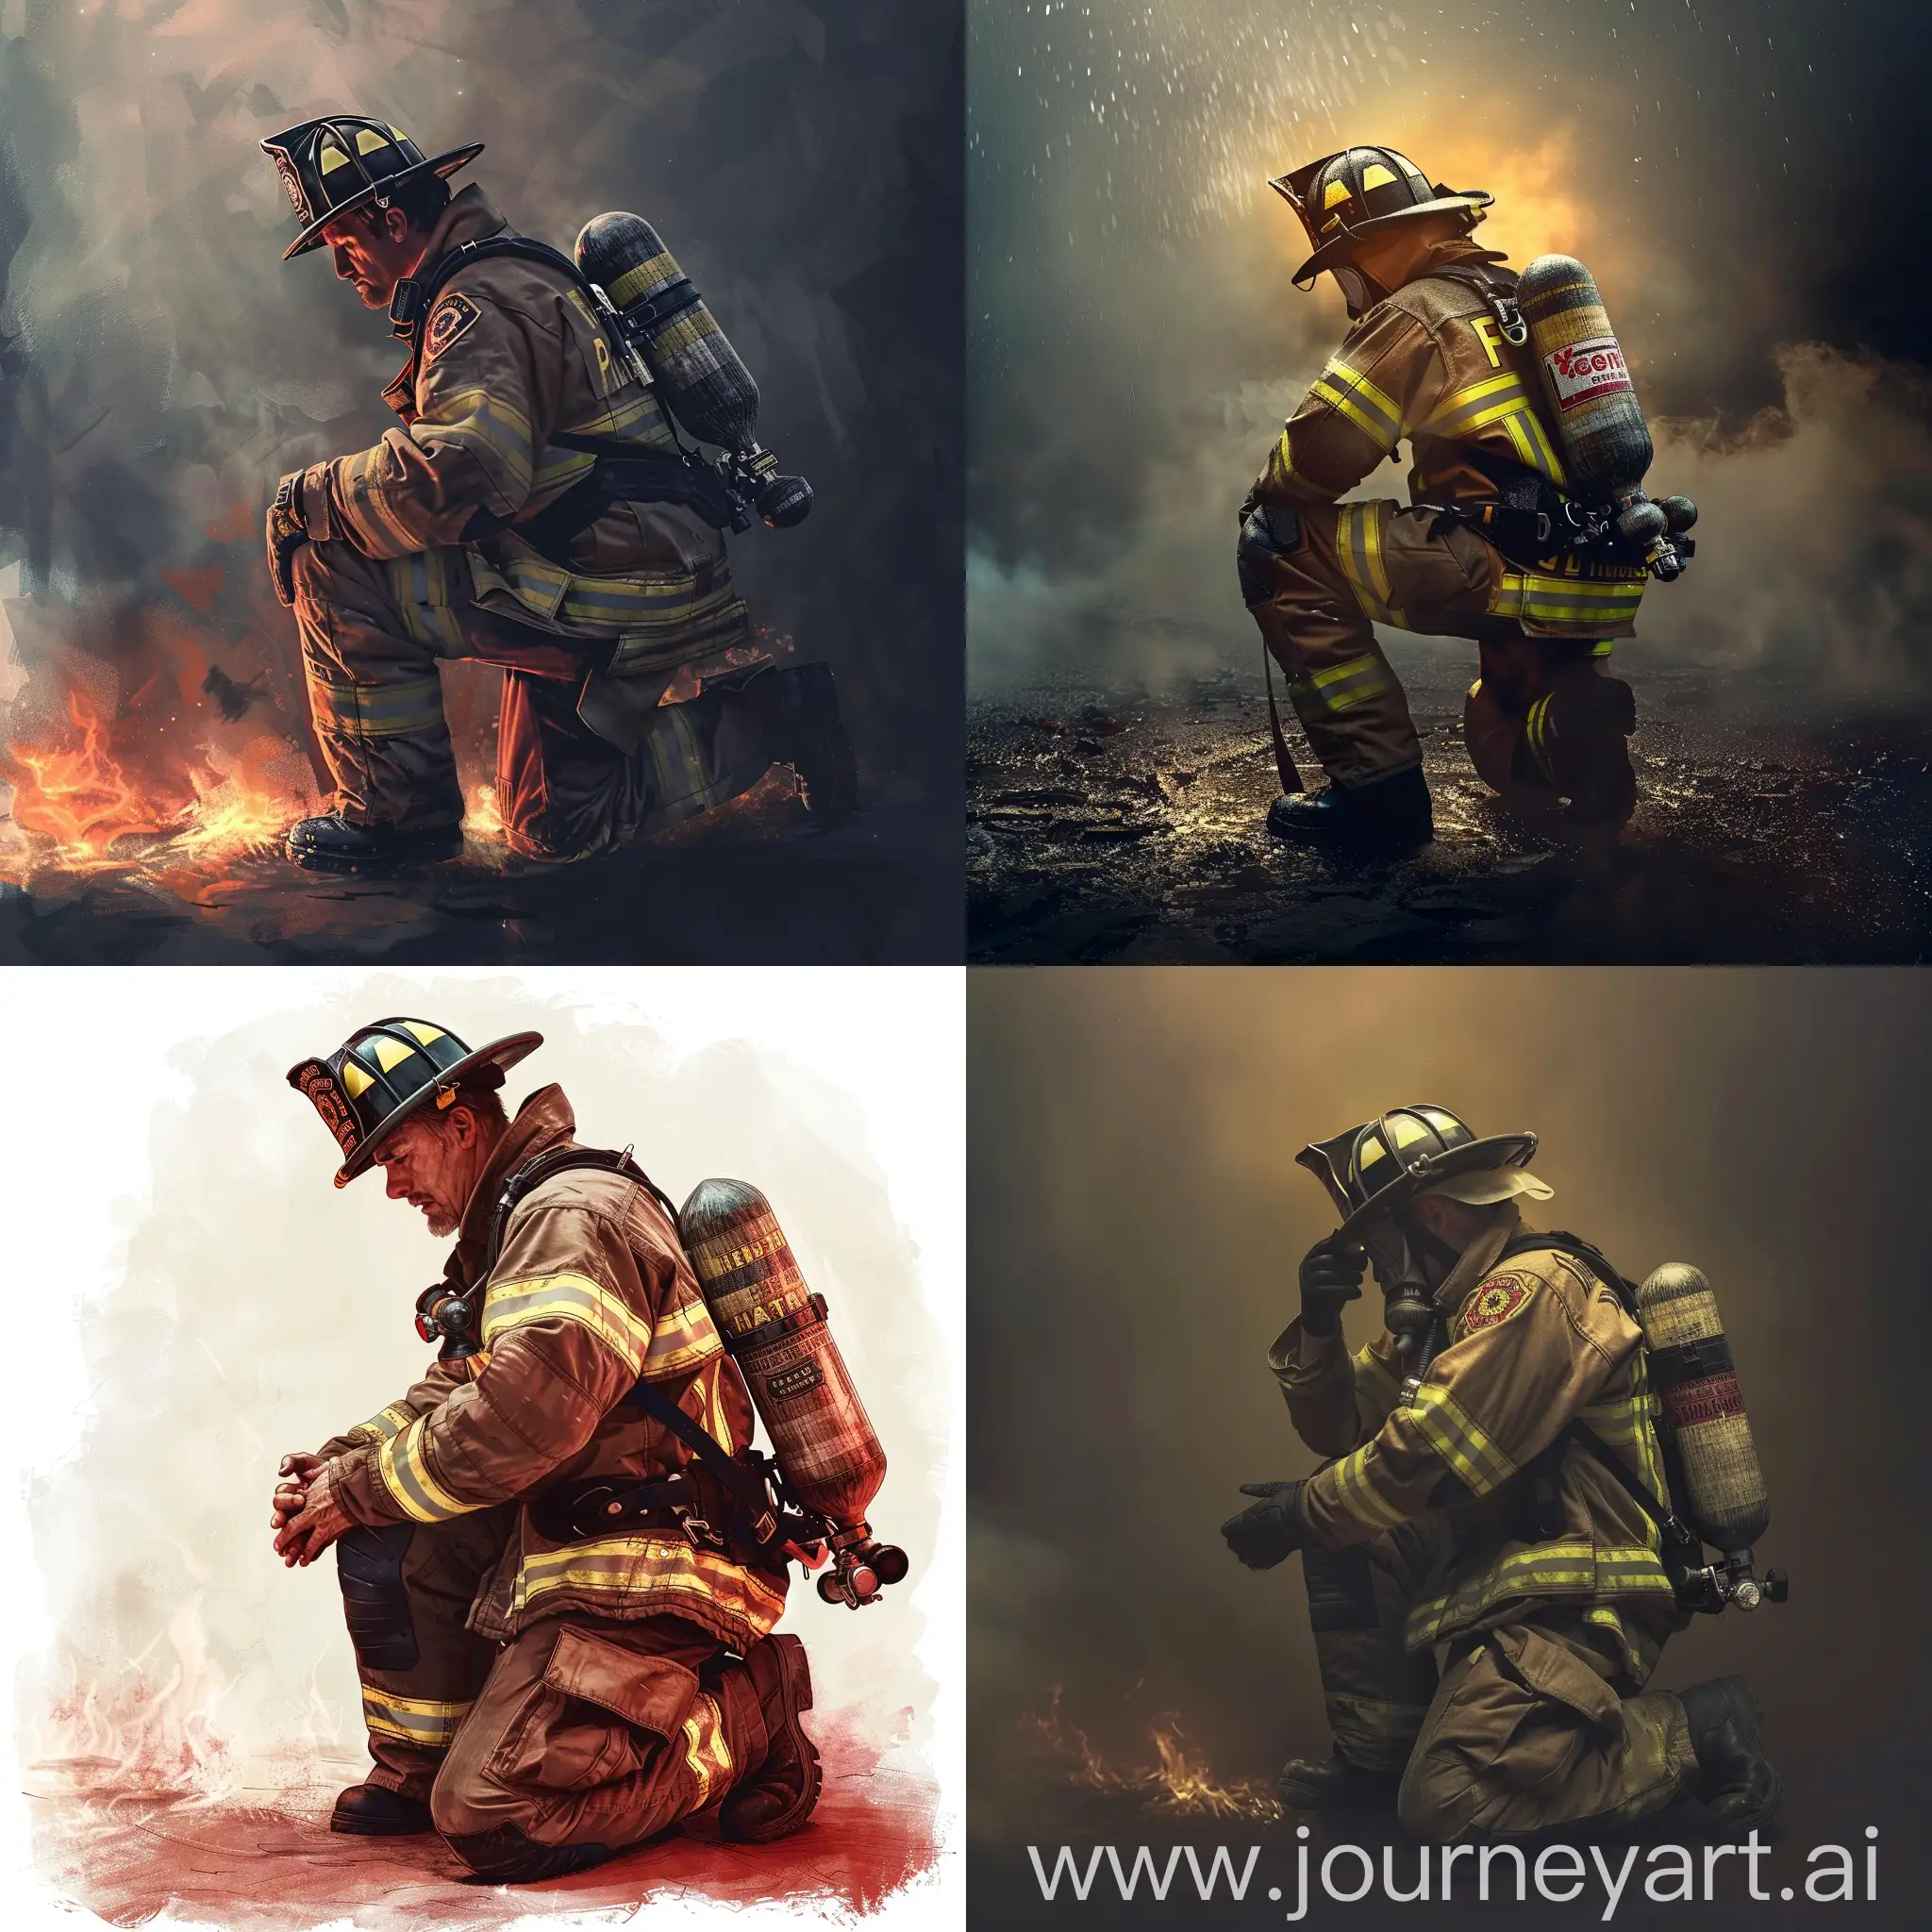 Courageous-Firefighter-in-Action